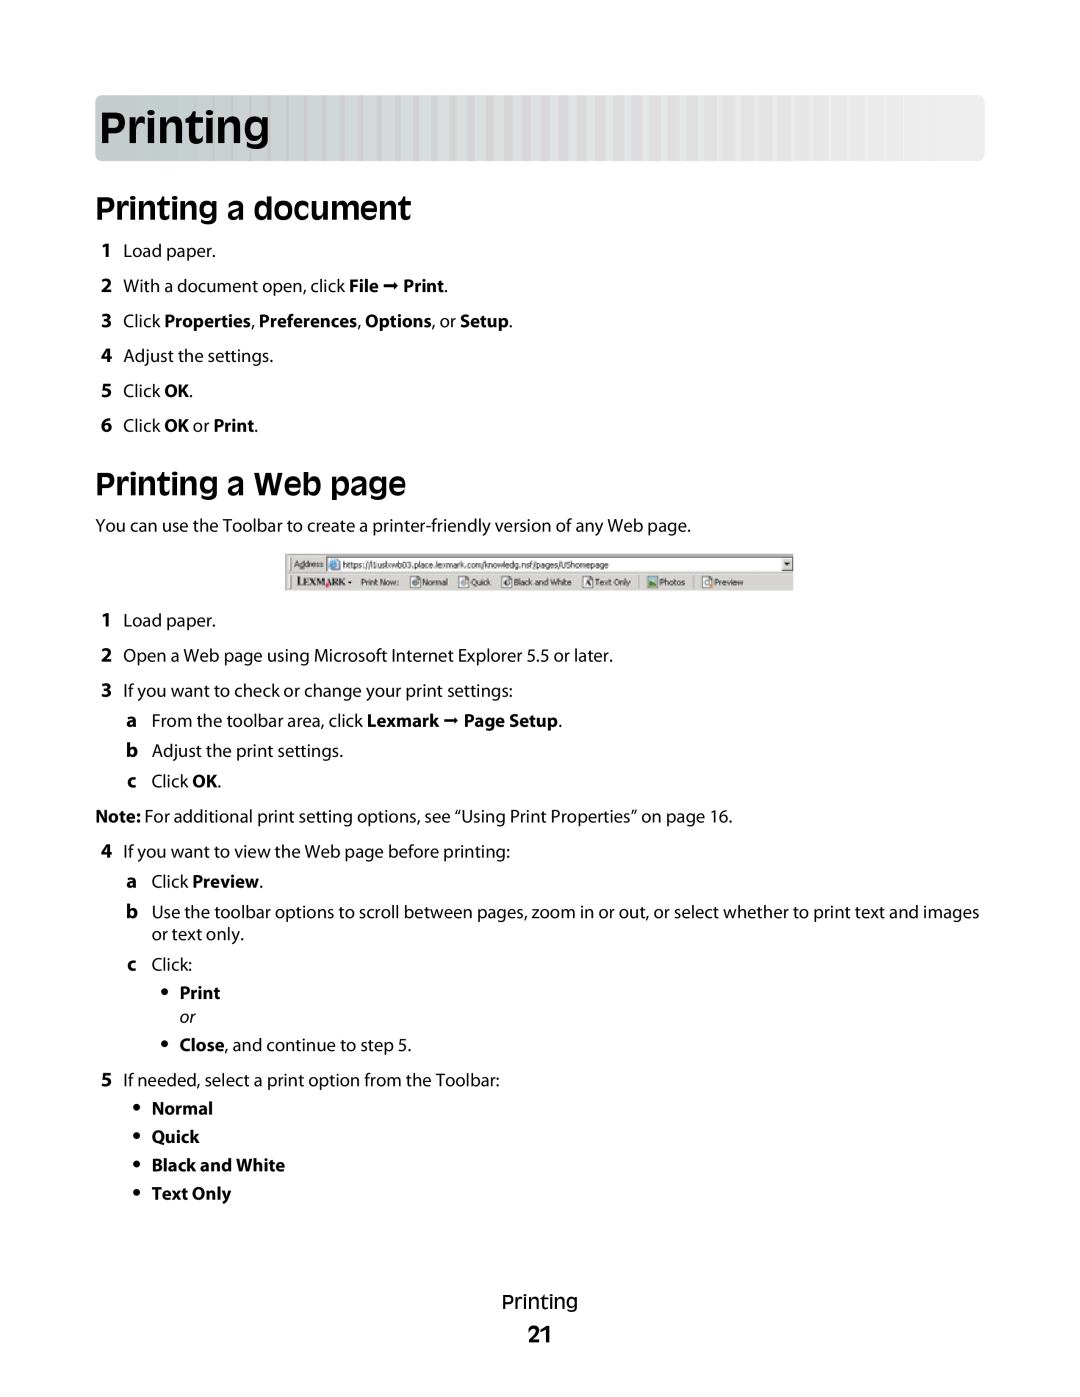 Lexmark 2500 Series Prin ting, Printing a document, Printing a Web page, Click Properties, Preferences, Options, or Setup 